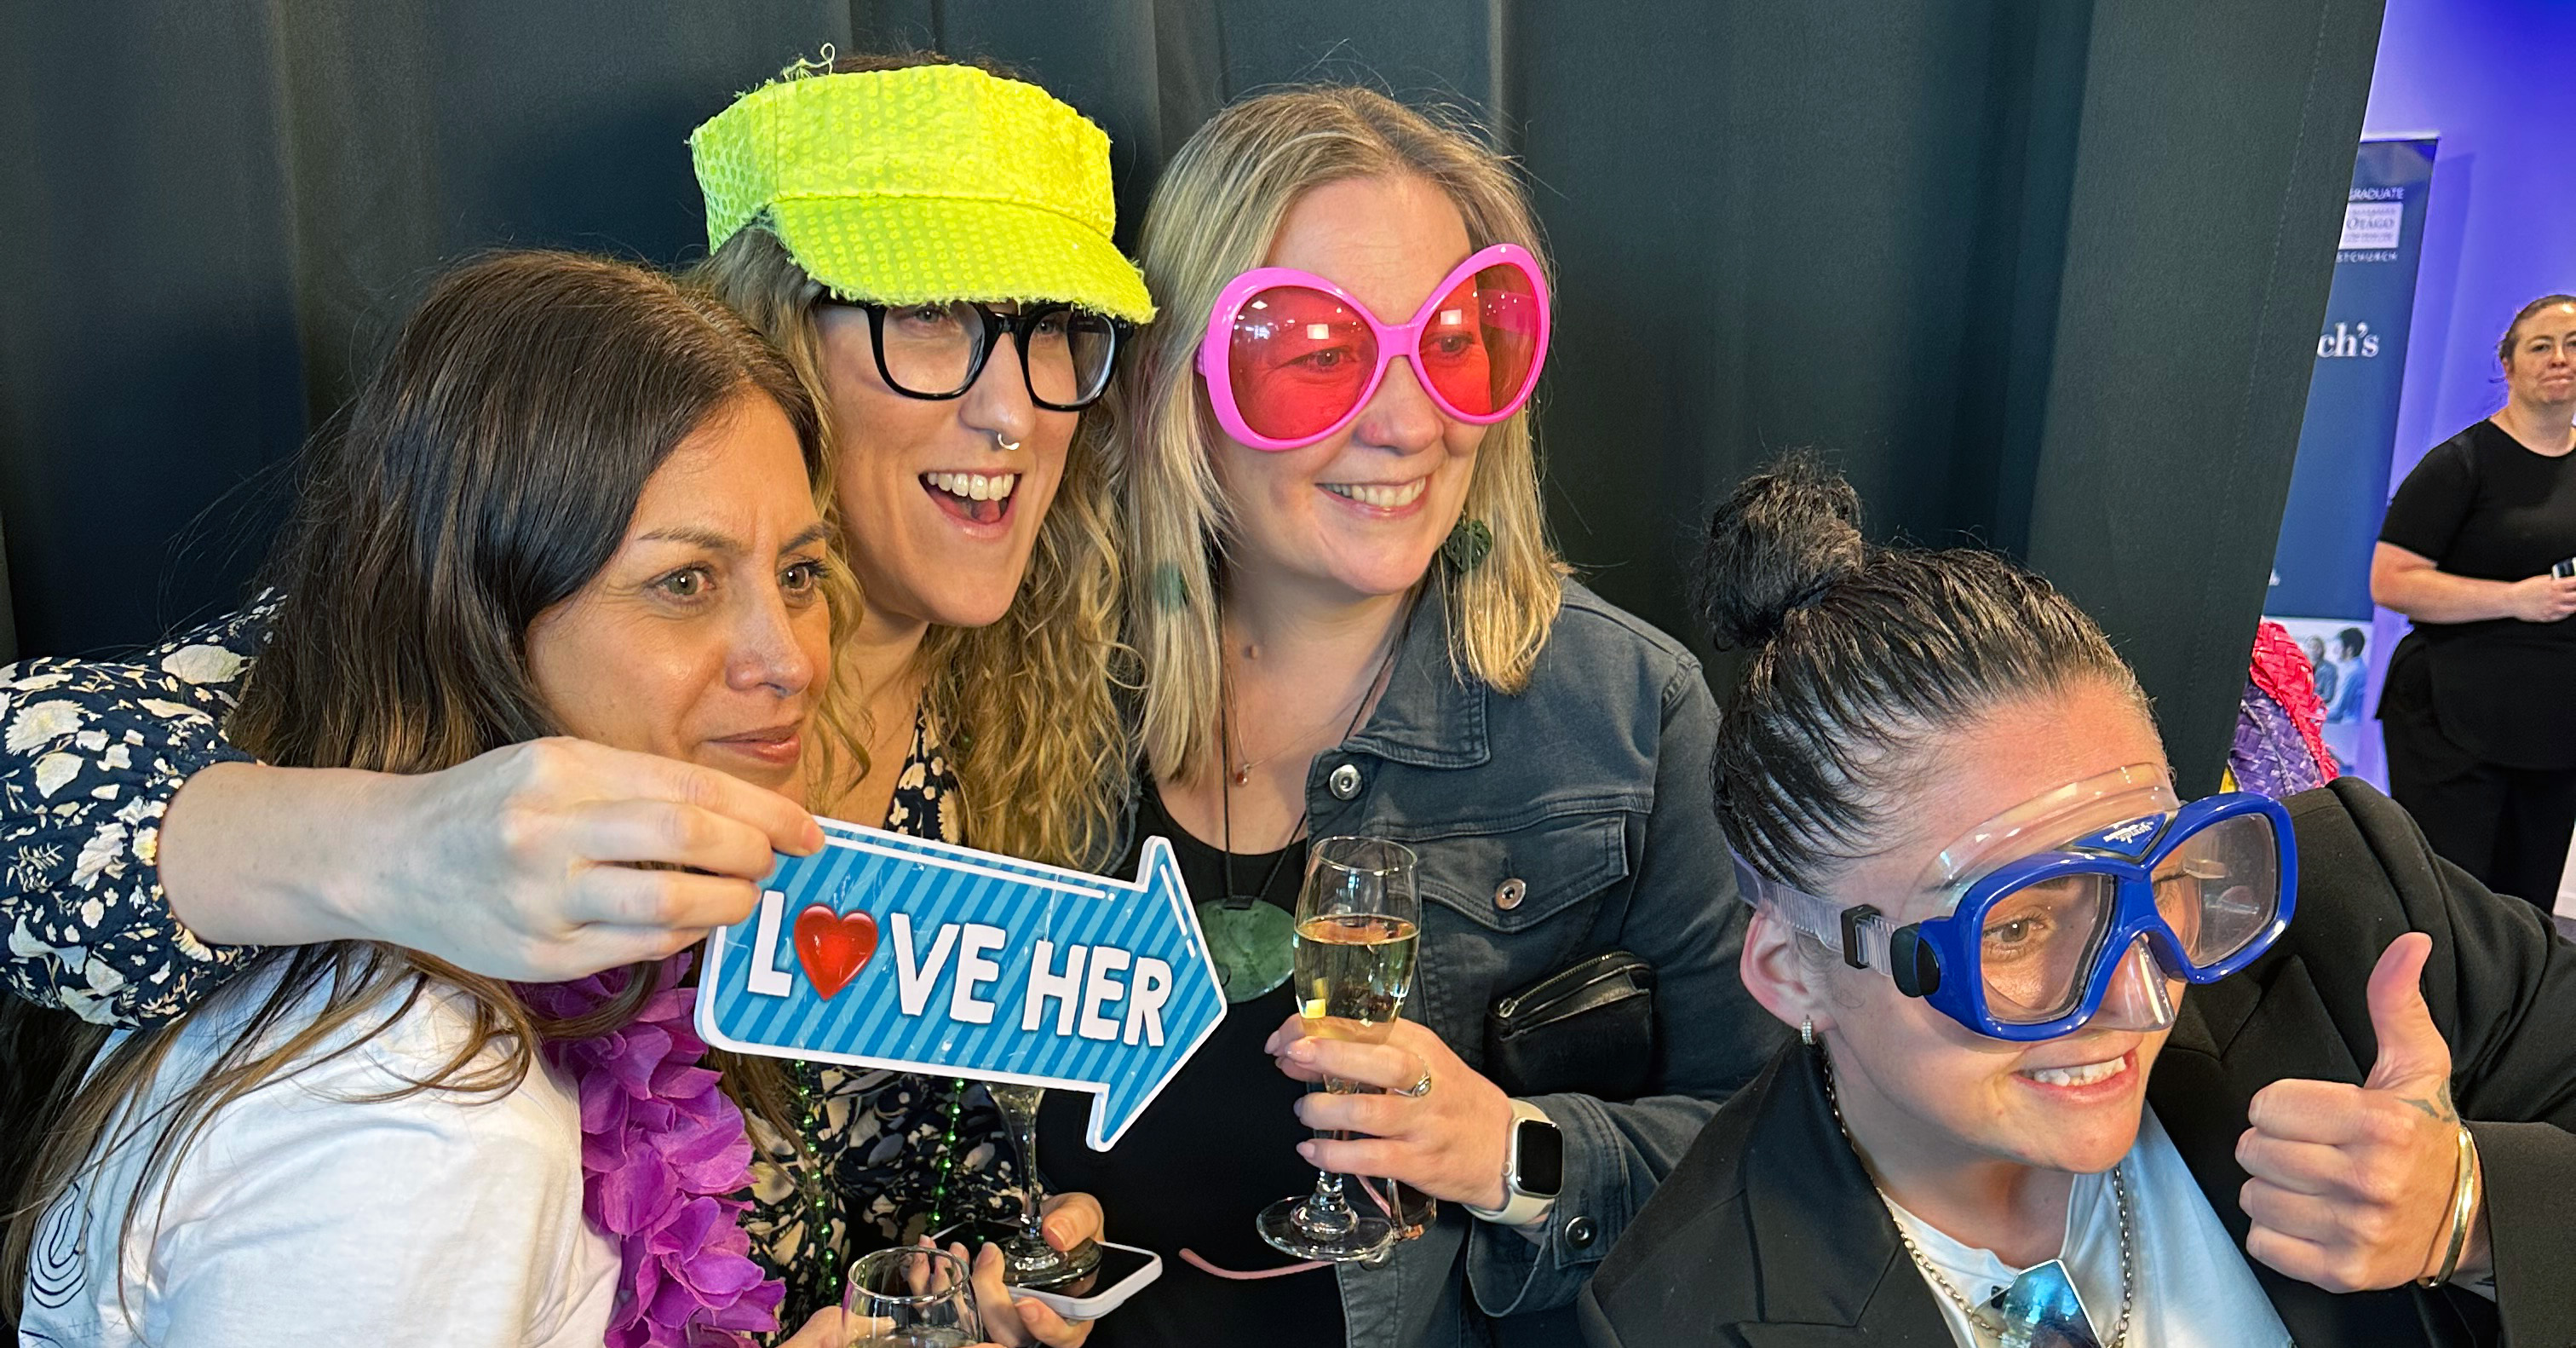 Four women pose for a photo with props including goggles, oversized sunglasses.